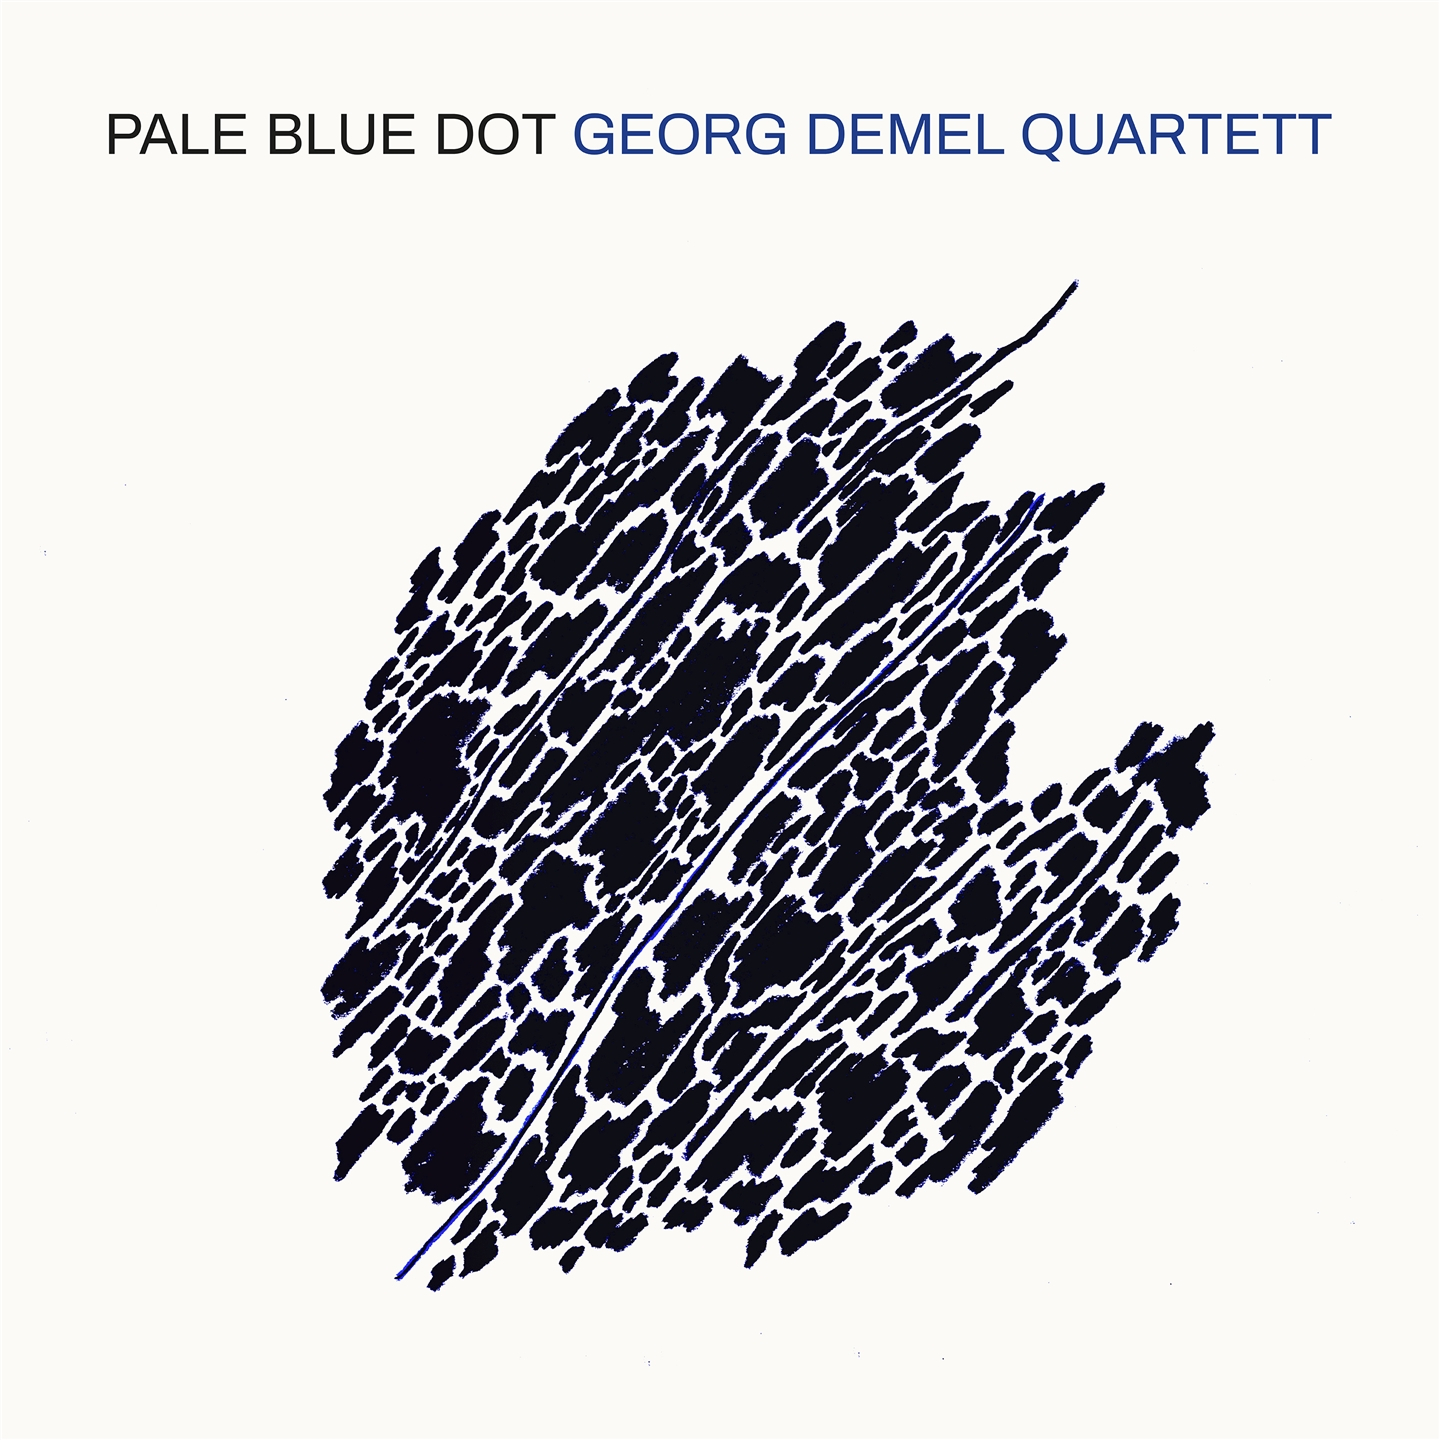 Georg Demel - Pale Blue Dot - Picture 1 of 1